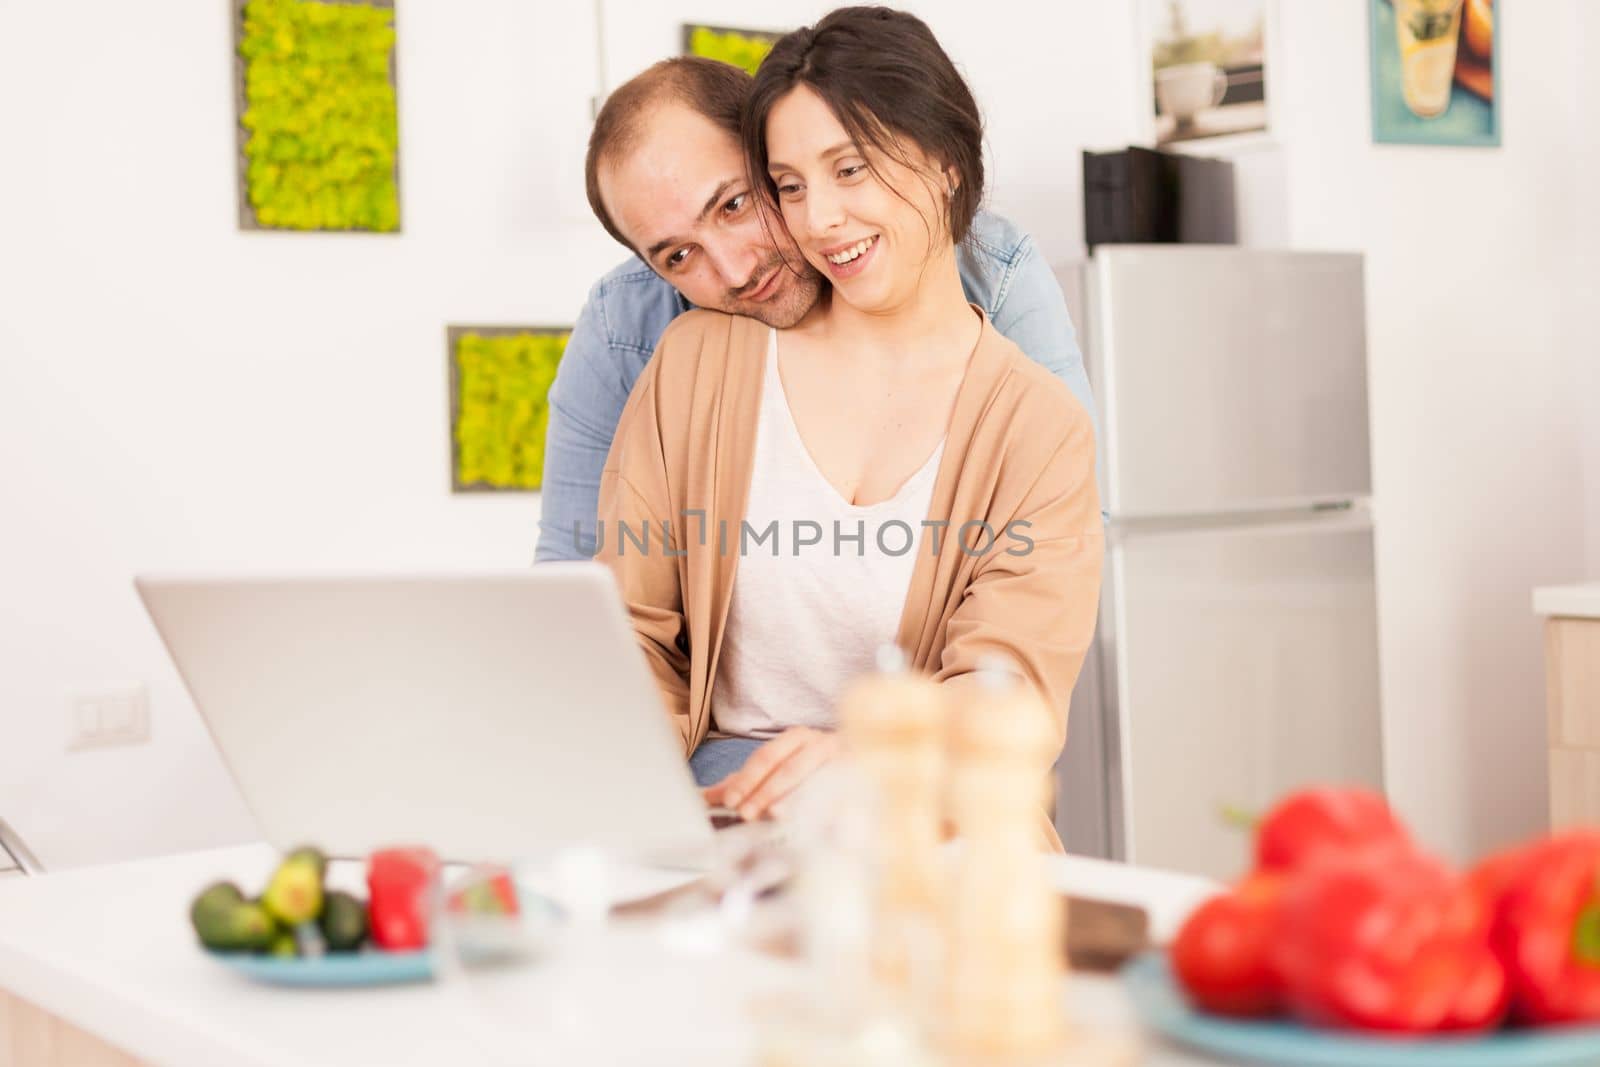 Smiling couple using laptop in kitchen with healthy vegetables on the table. Happy loving cheerful romantic in love couple at home using modern wifi wireless internet technology